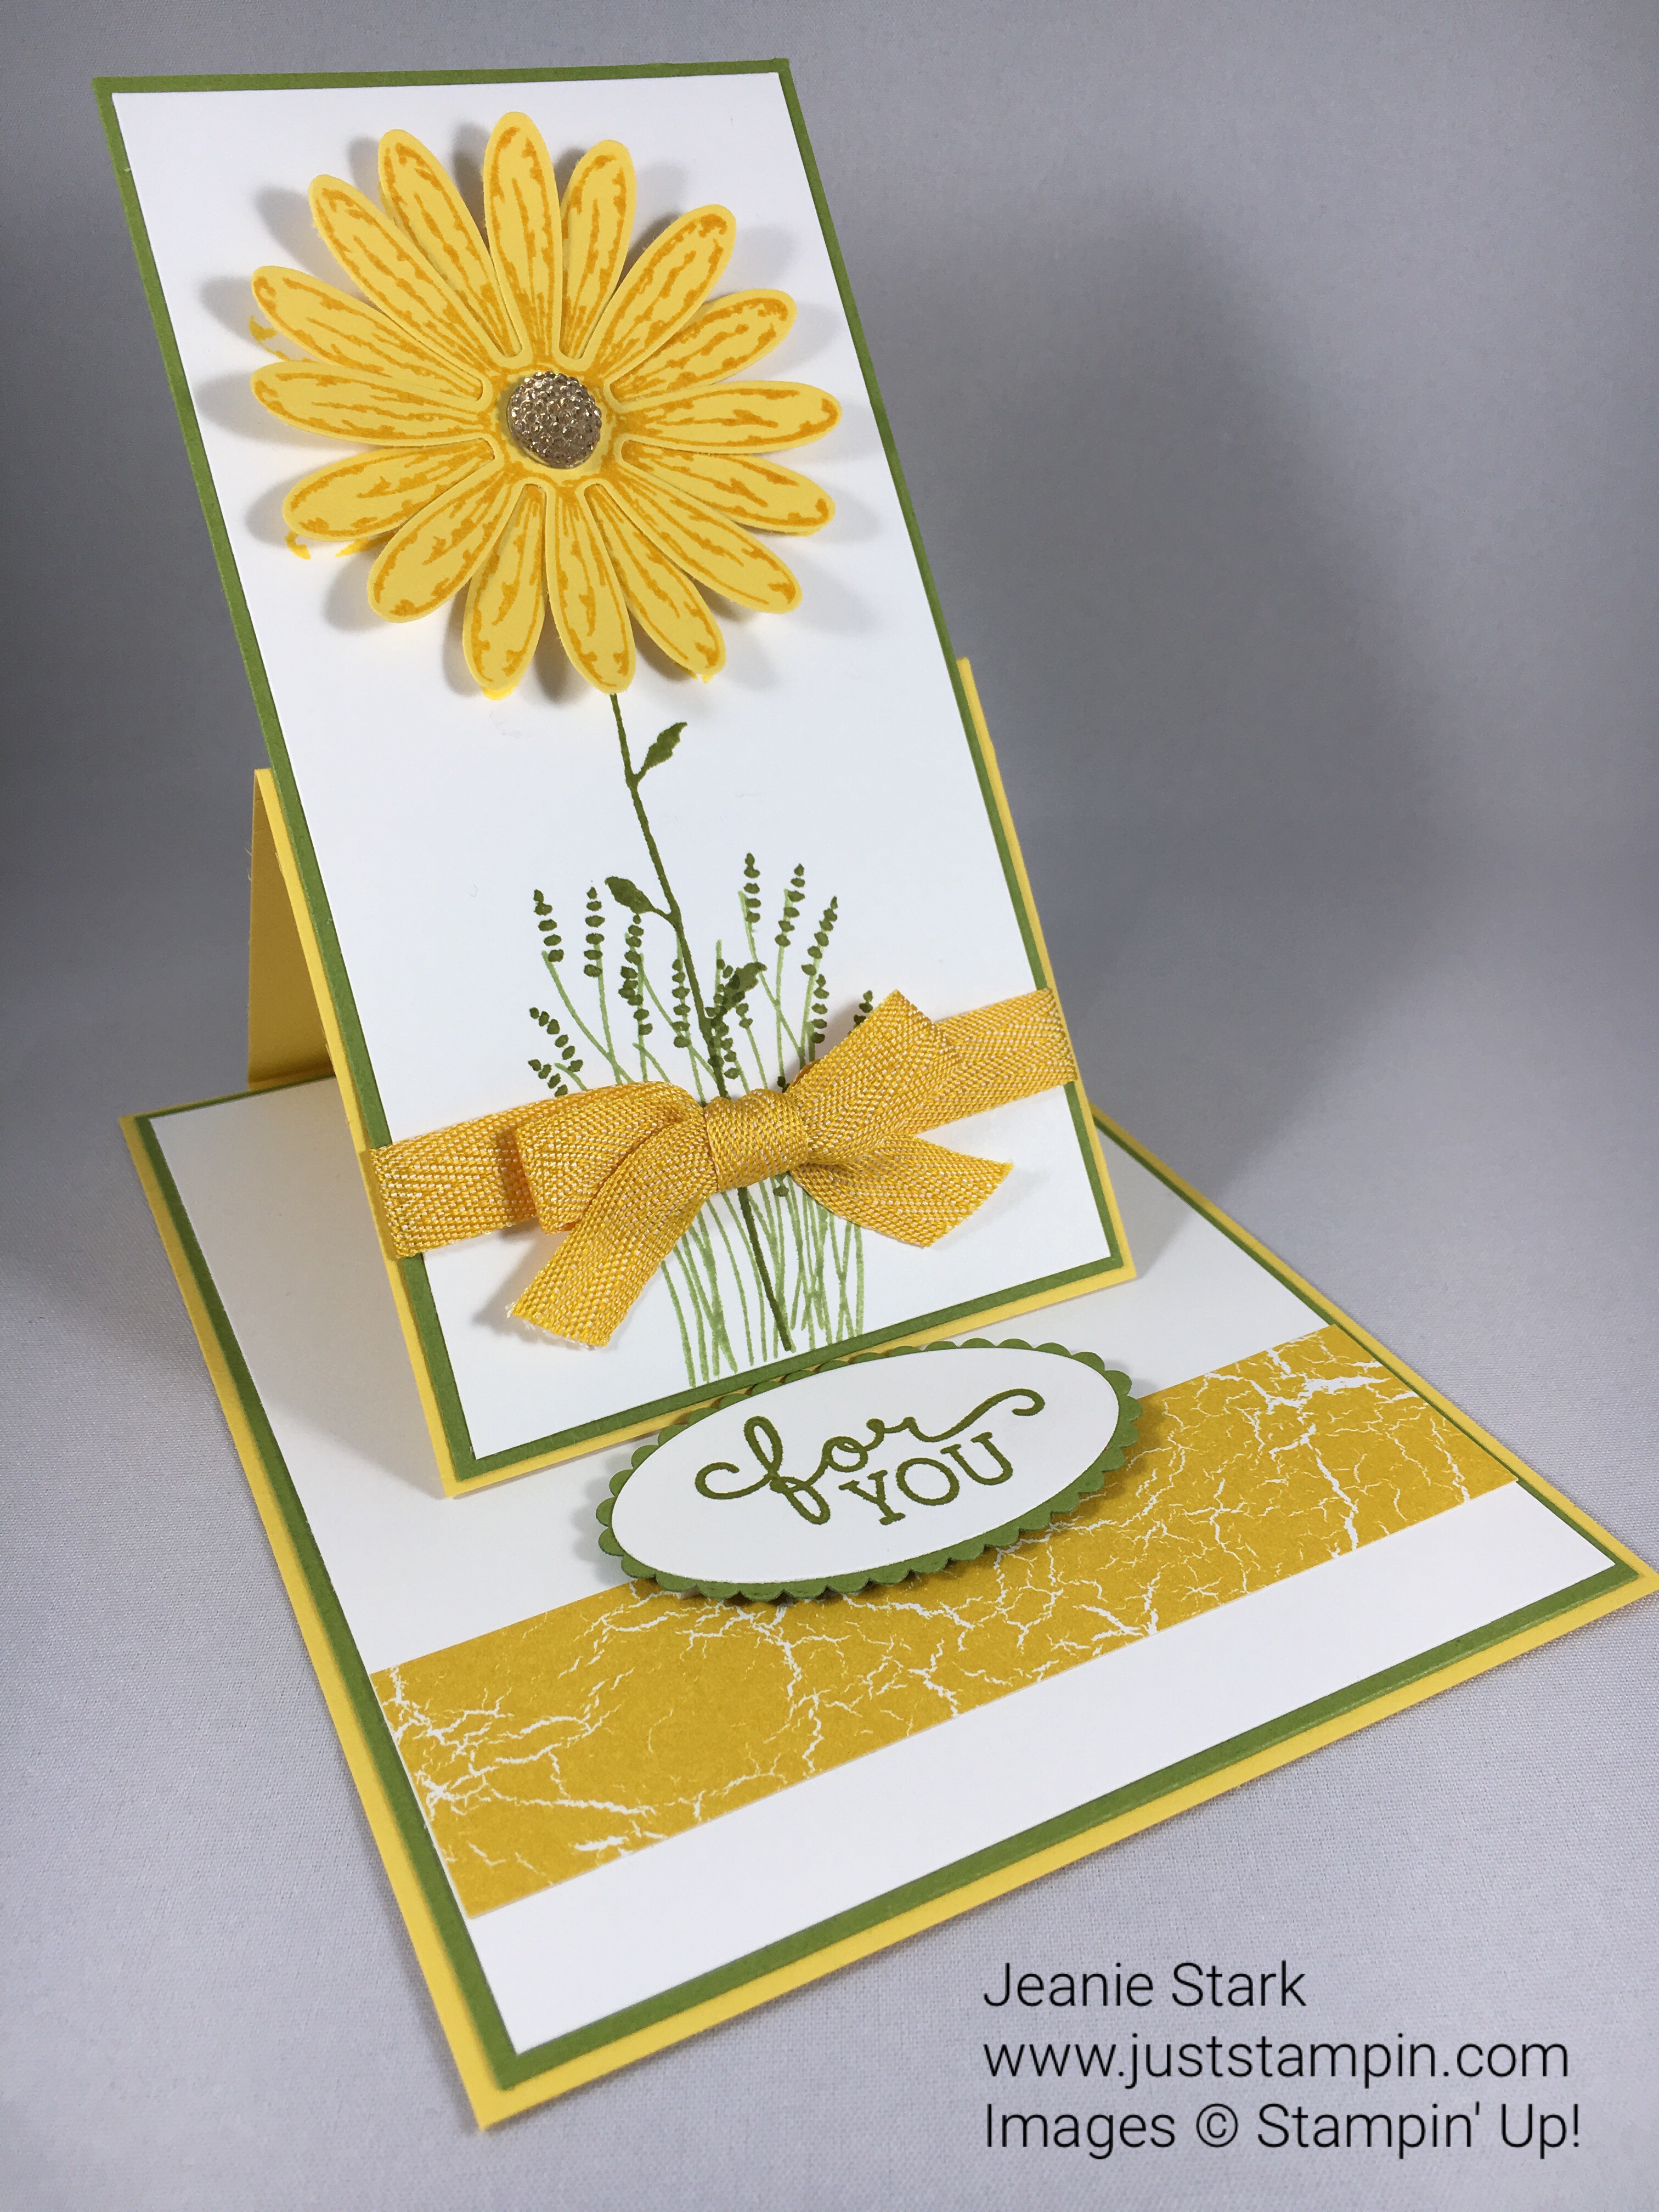 Stampin Up Daisy Delight fun fold easel card. For lots of fun fold card inspiration check out my ABC Fun Folds at www.juststampin.com.